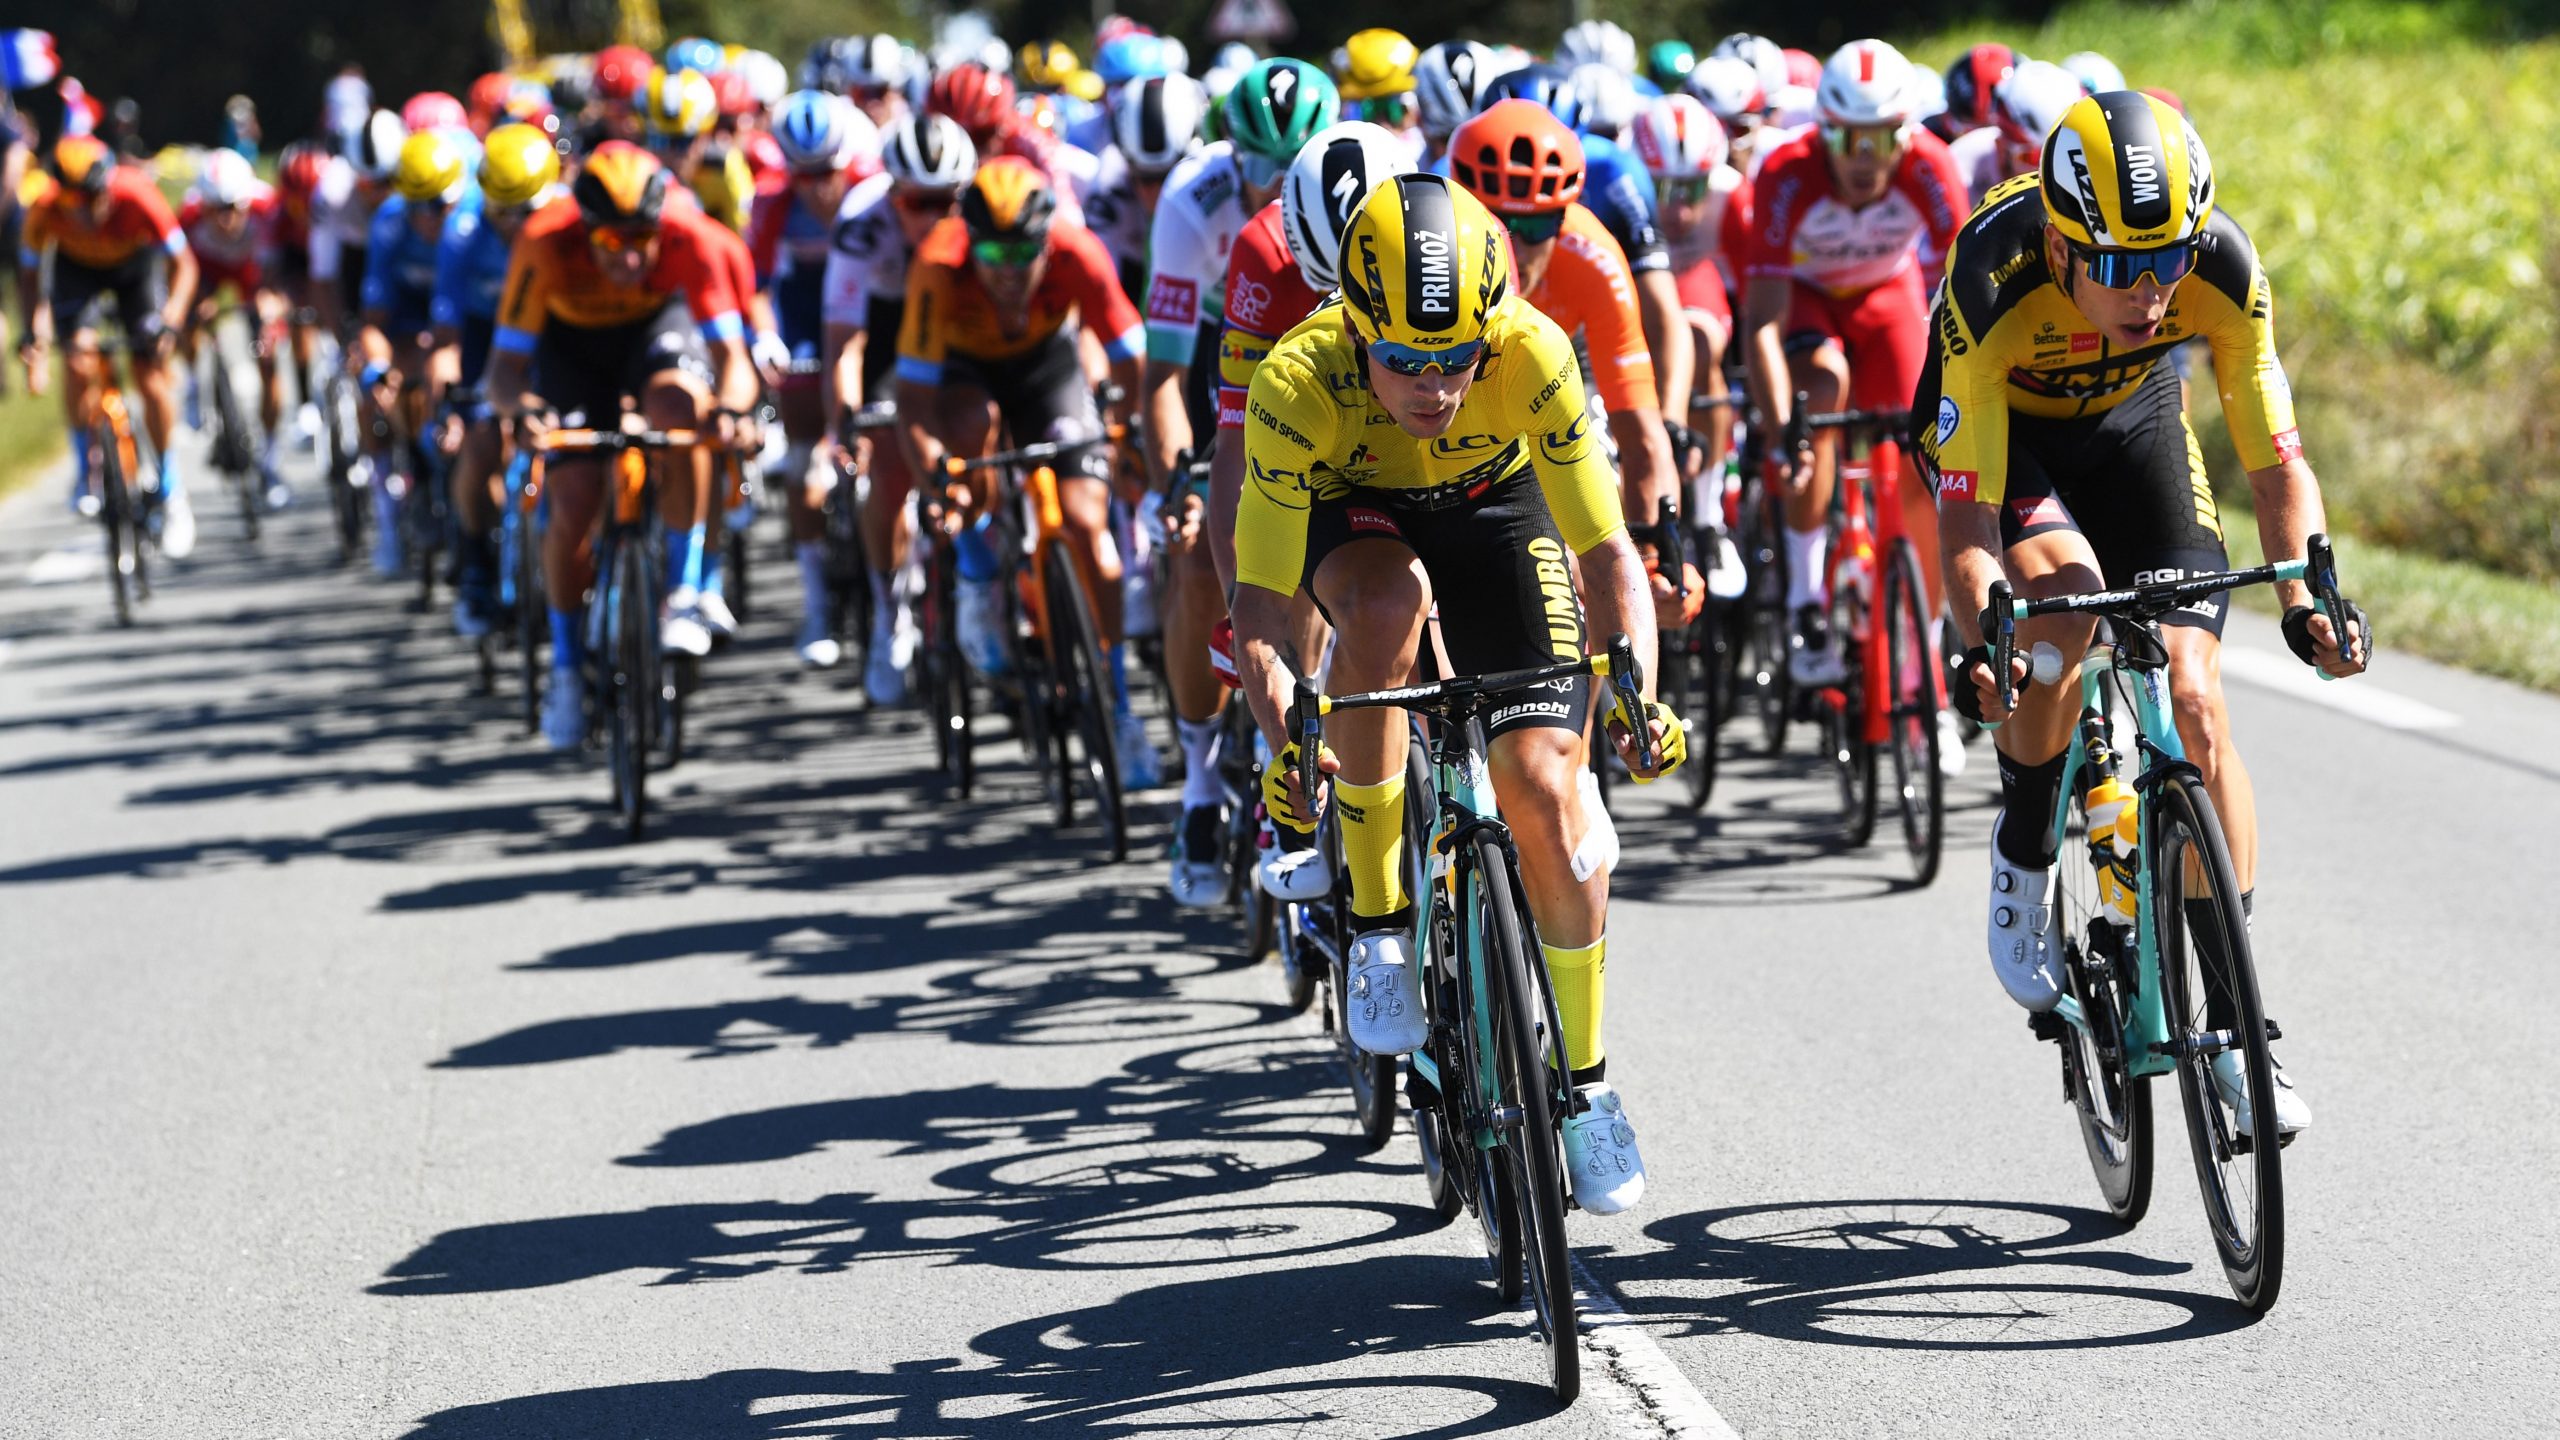 Tour de France live stream 2020 how to watch stage 11 of the race free